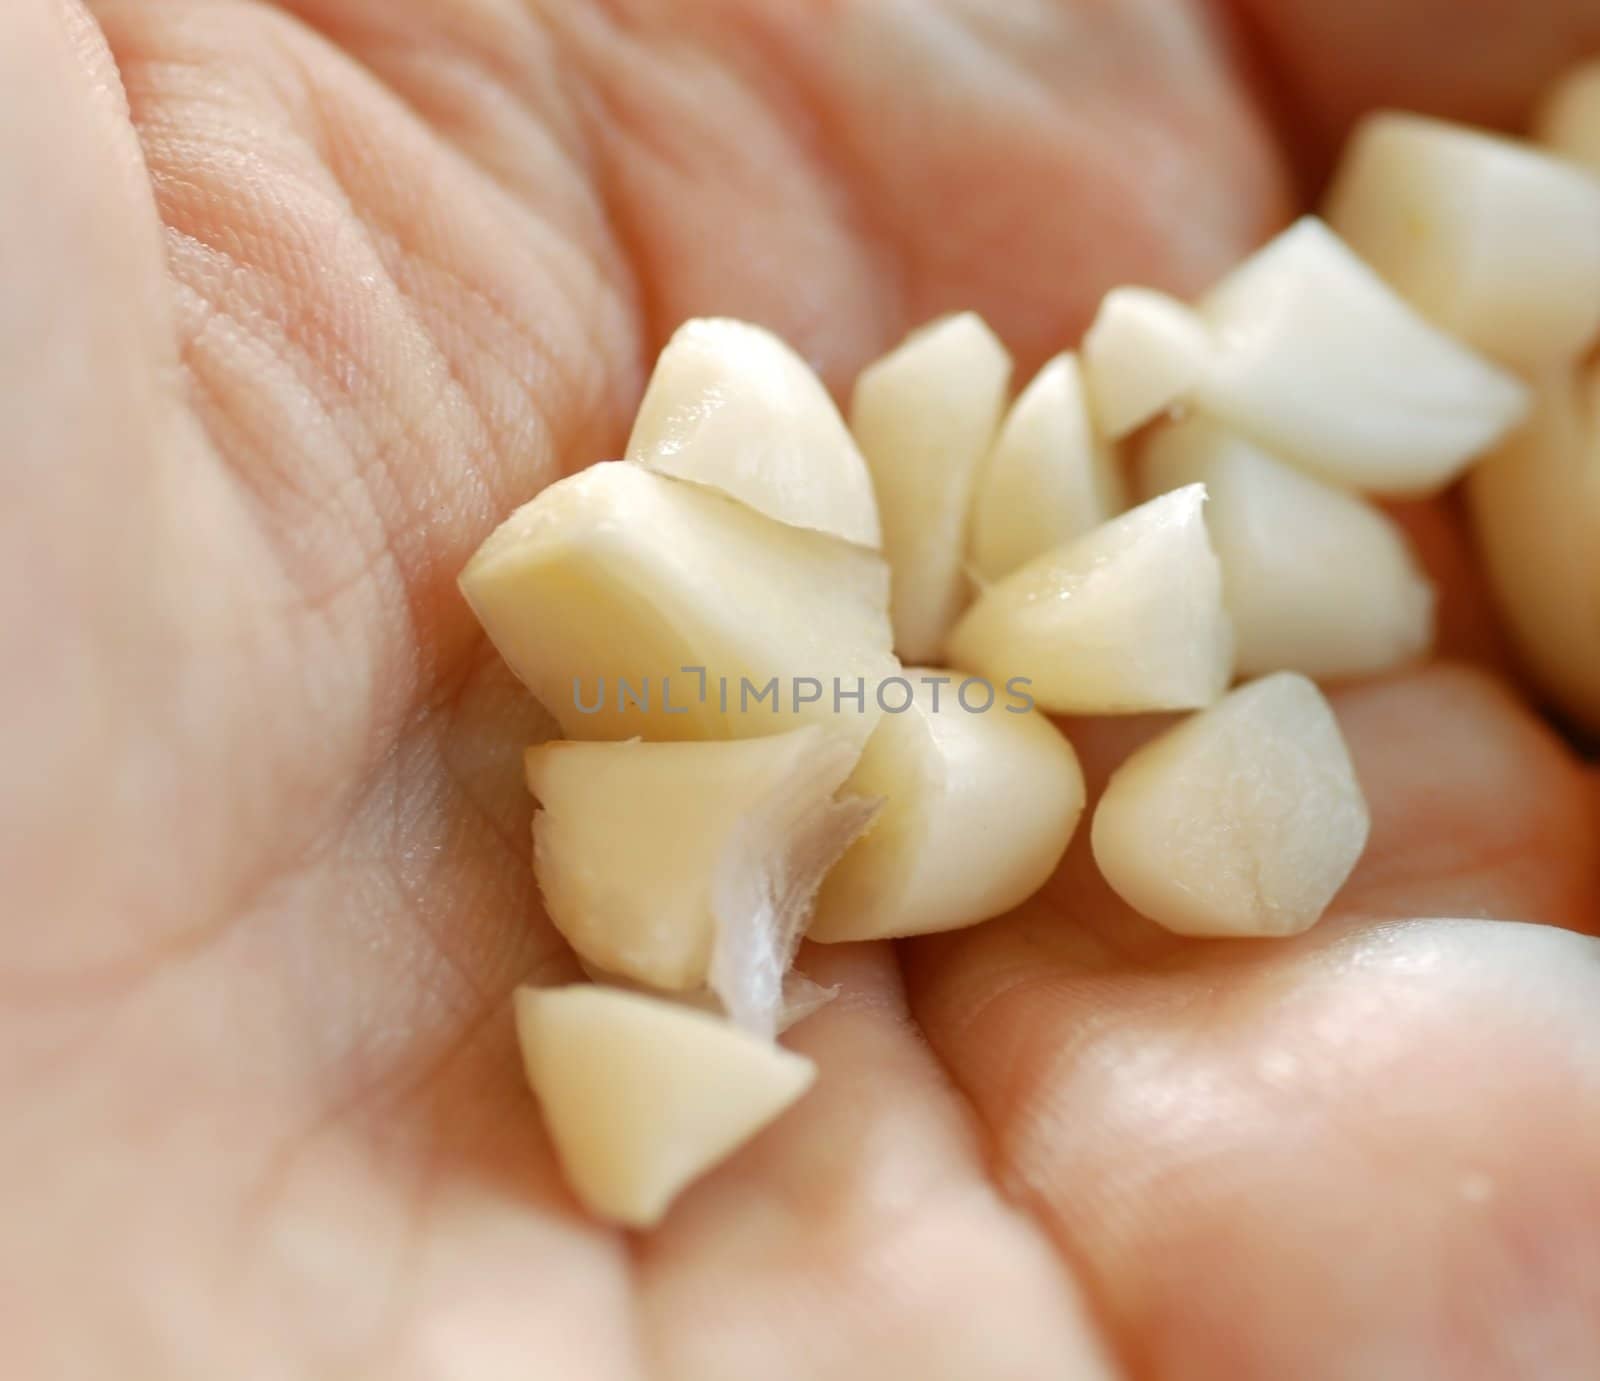 Chopped garlic on hand by simply